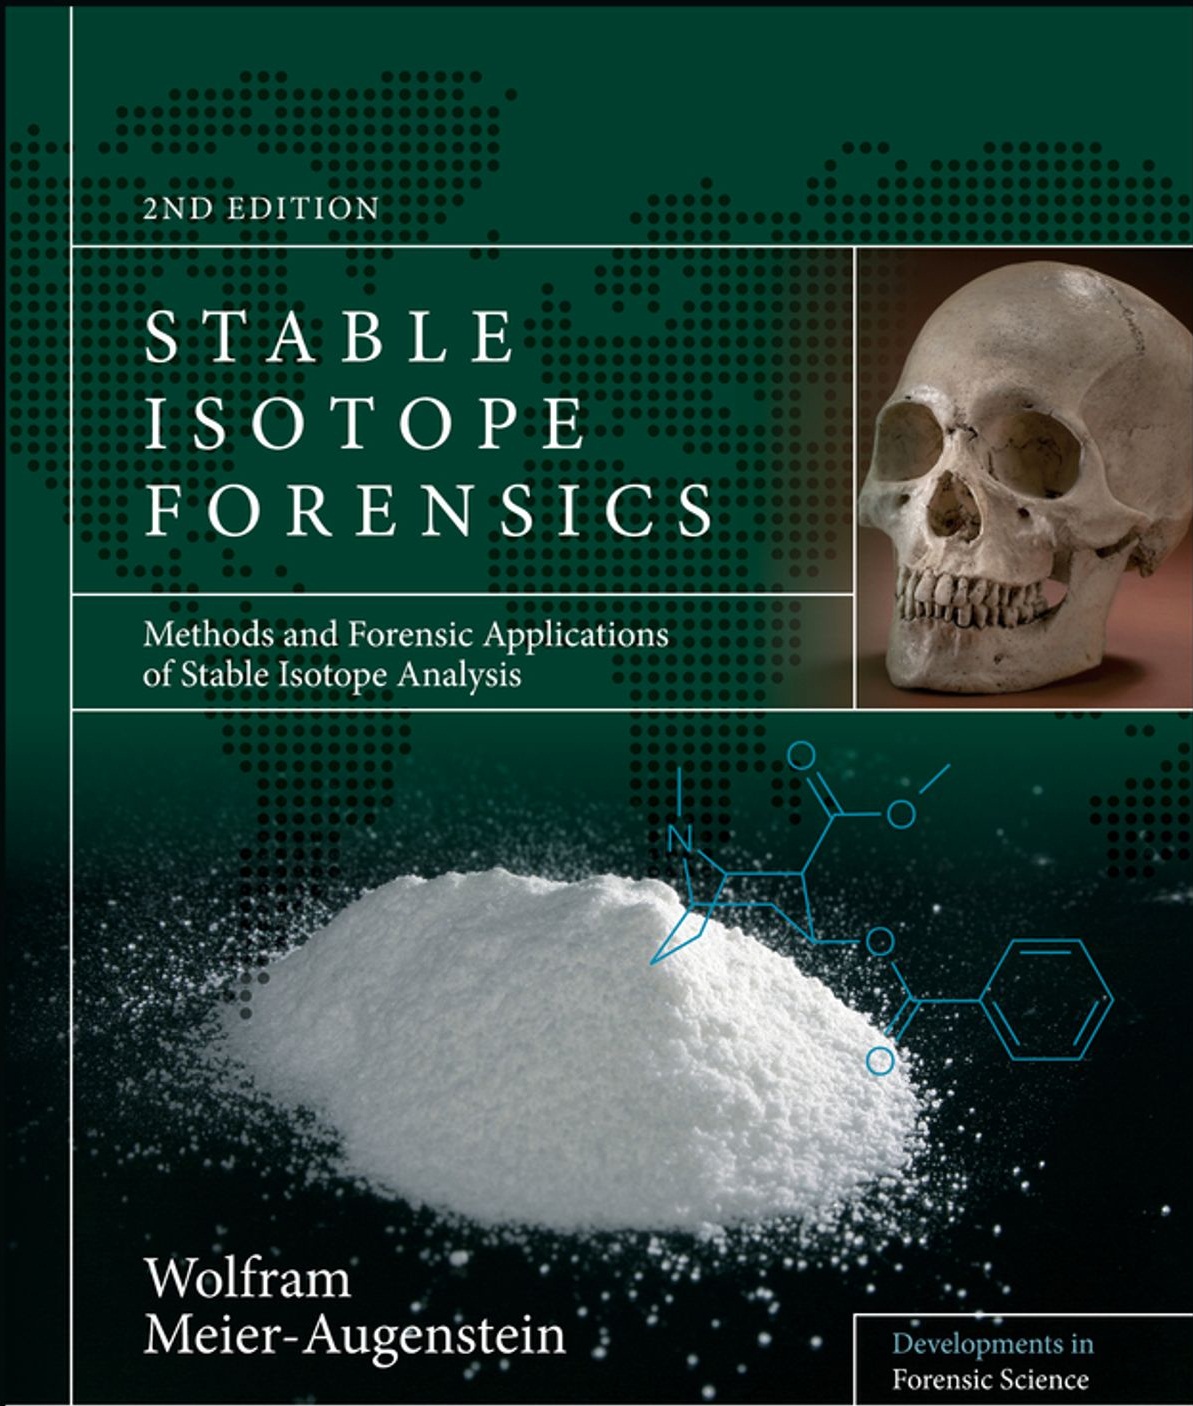 Stable Isotope Forensics: Methods and Forensic Applications of Stable Isotope Analysis, 2nd Edition